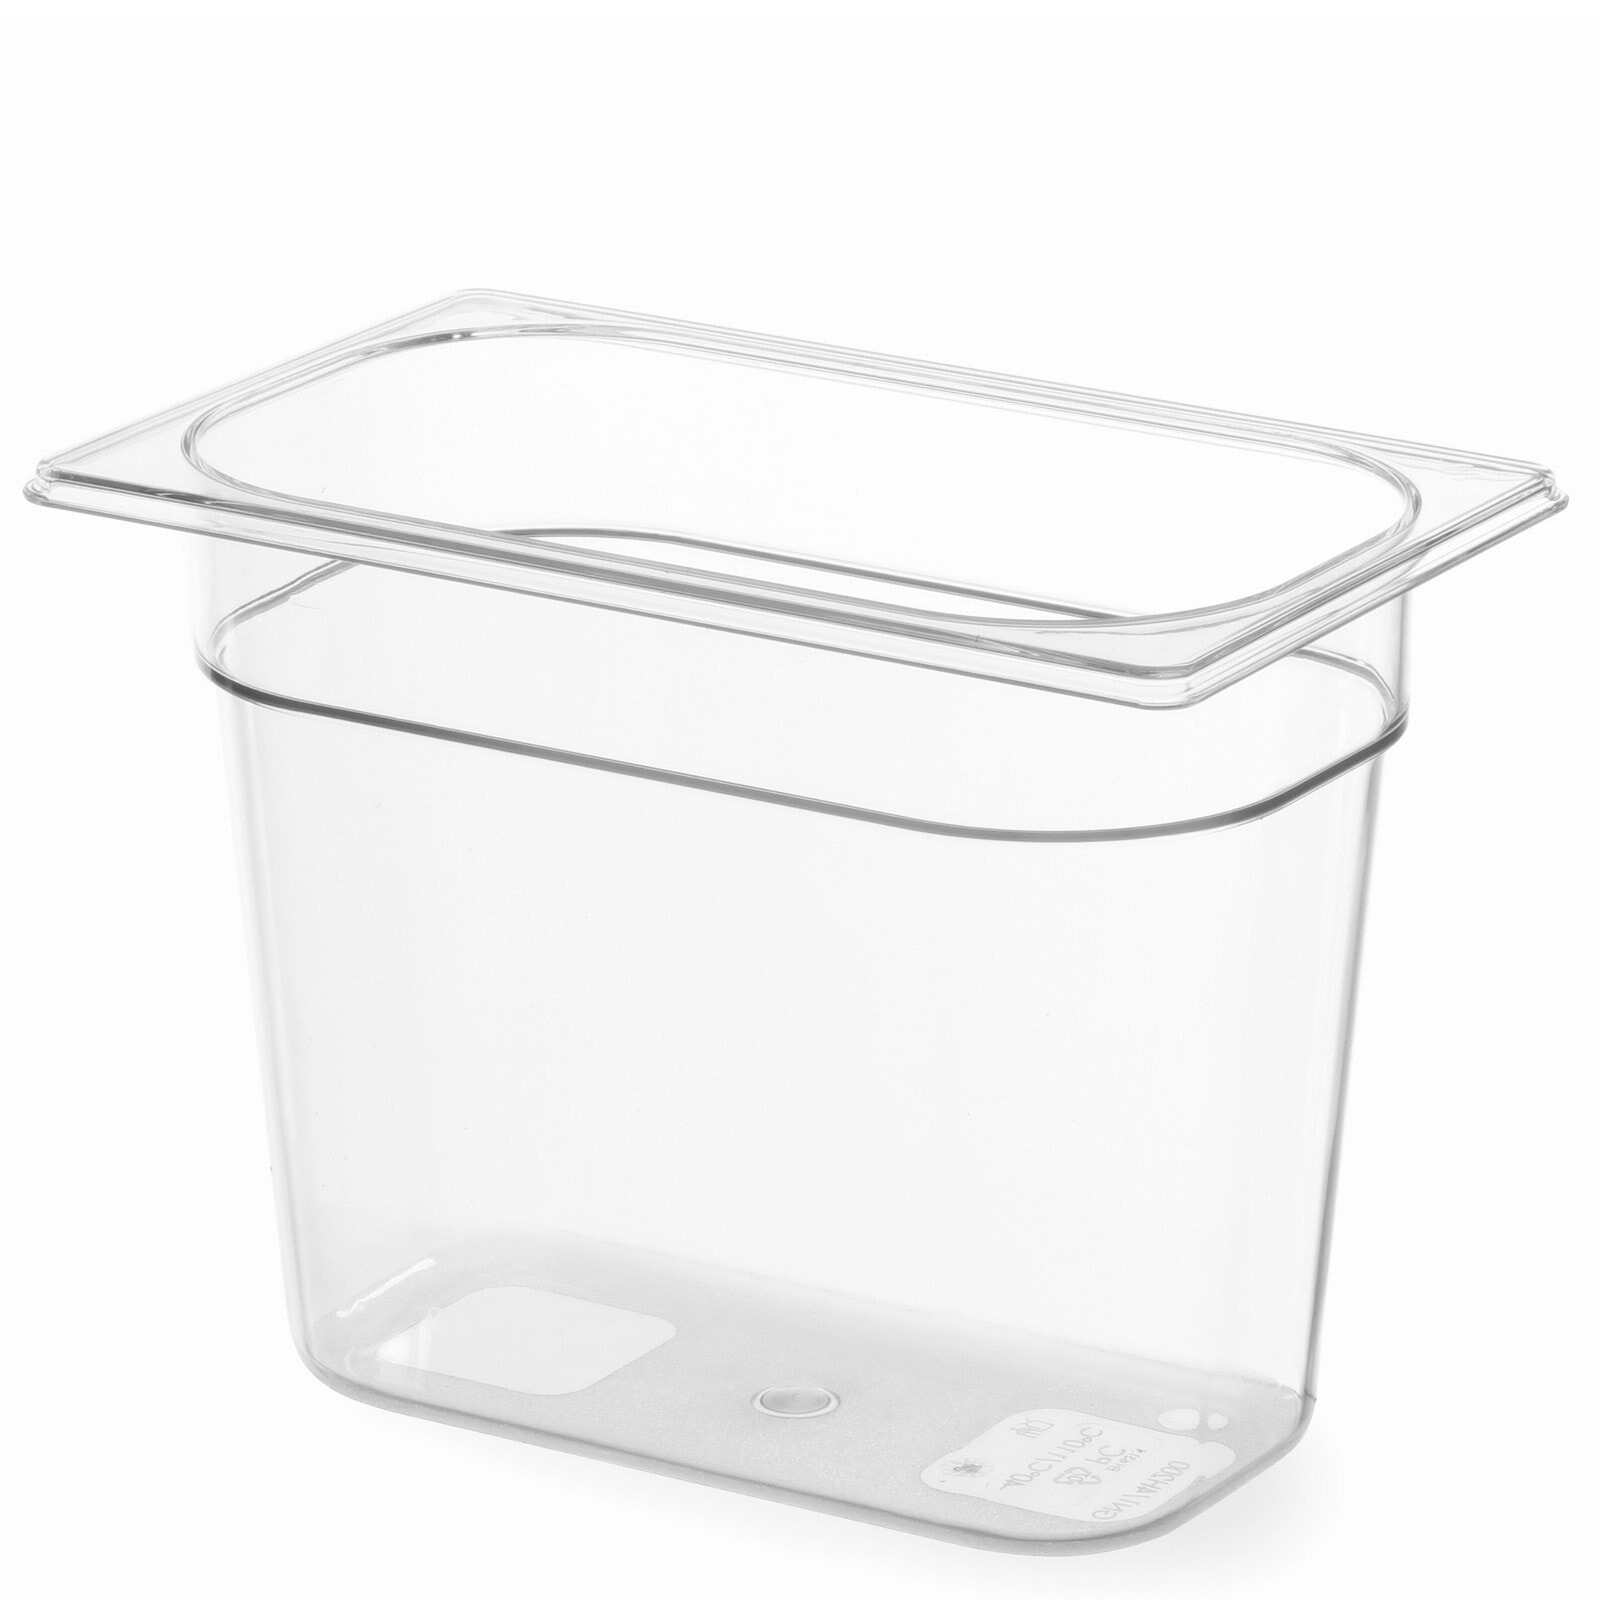 Transparent GN container made of polycarbonate 1/4 GN height 150 mm - Hendi 861615